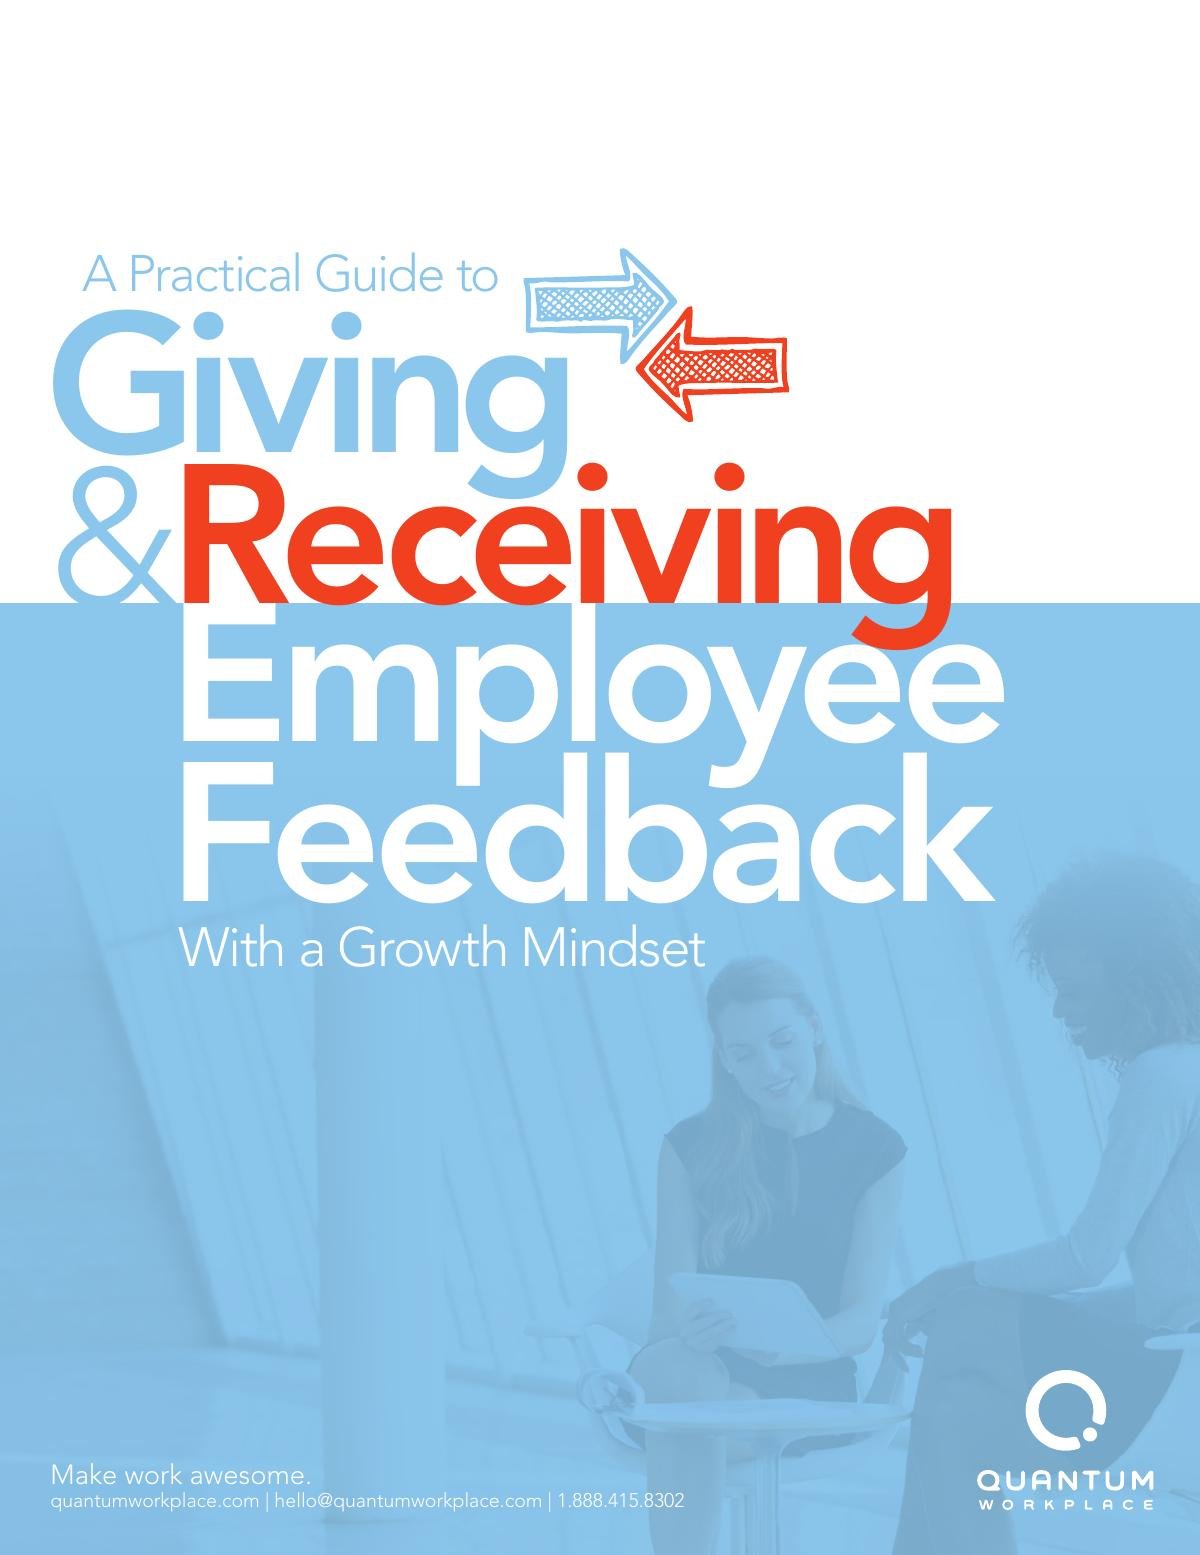 A Practical Guide to Giving and Receiving Employee Feedback